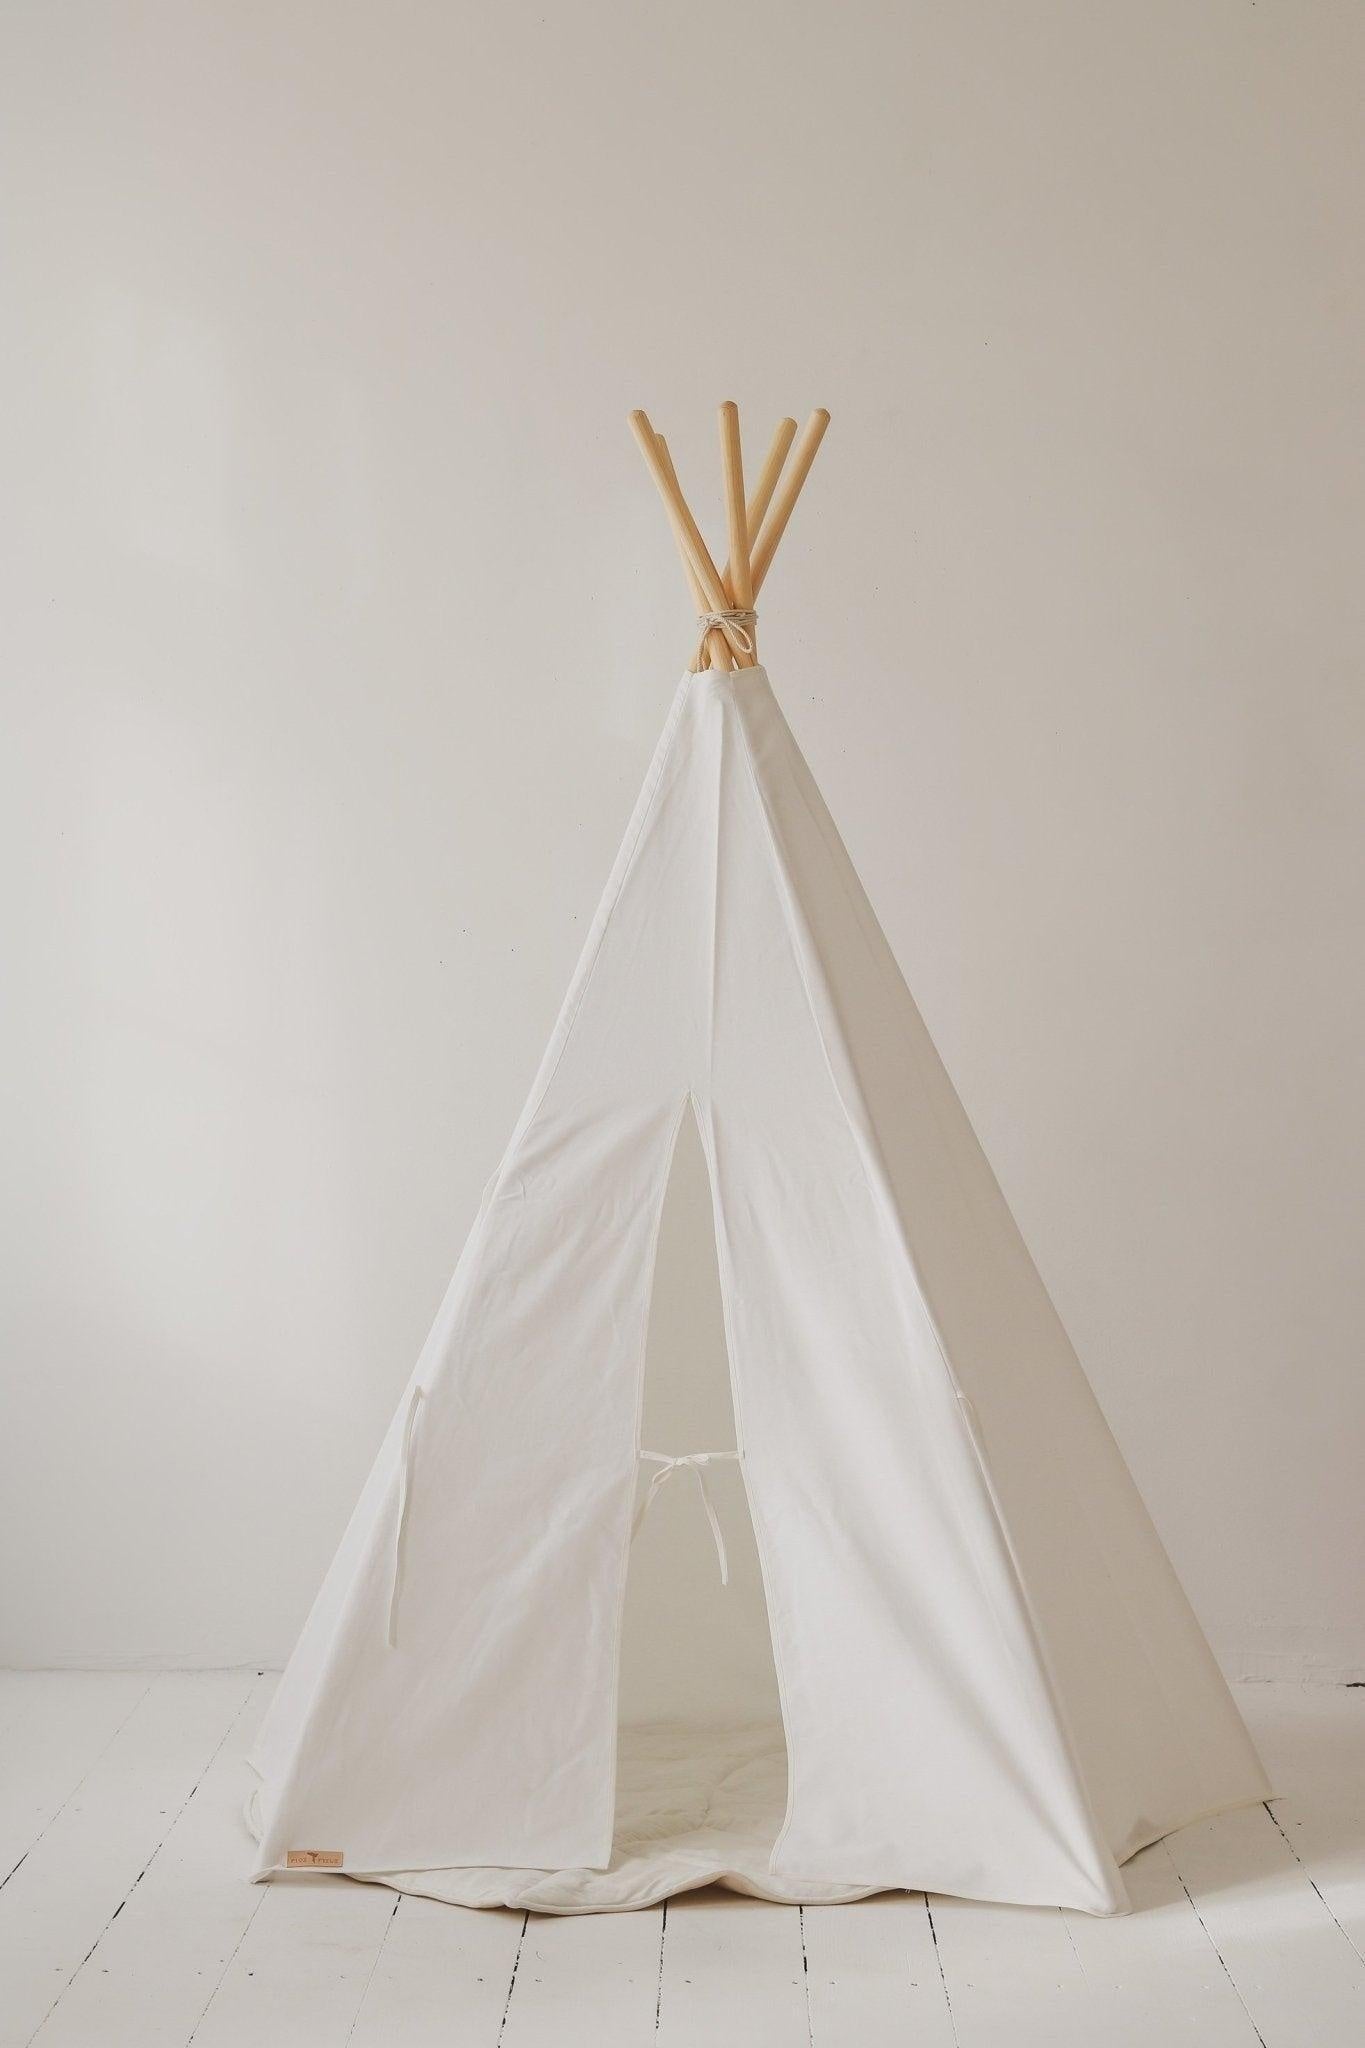 Teepee Tent “Snow White” + "White and Grey" Leaf Mat Set